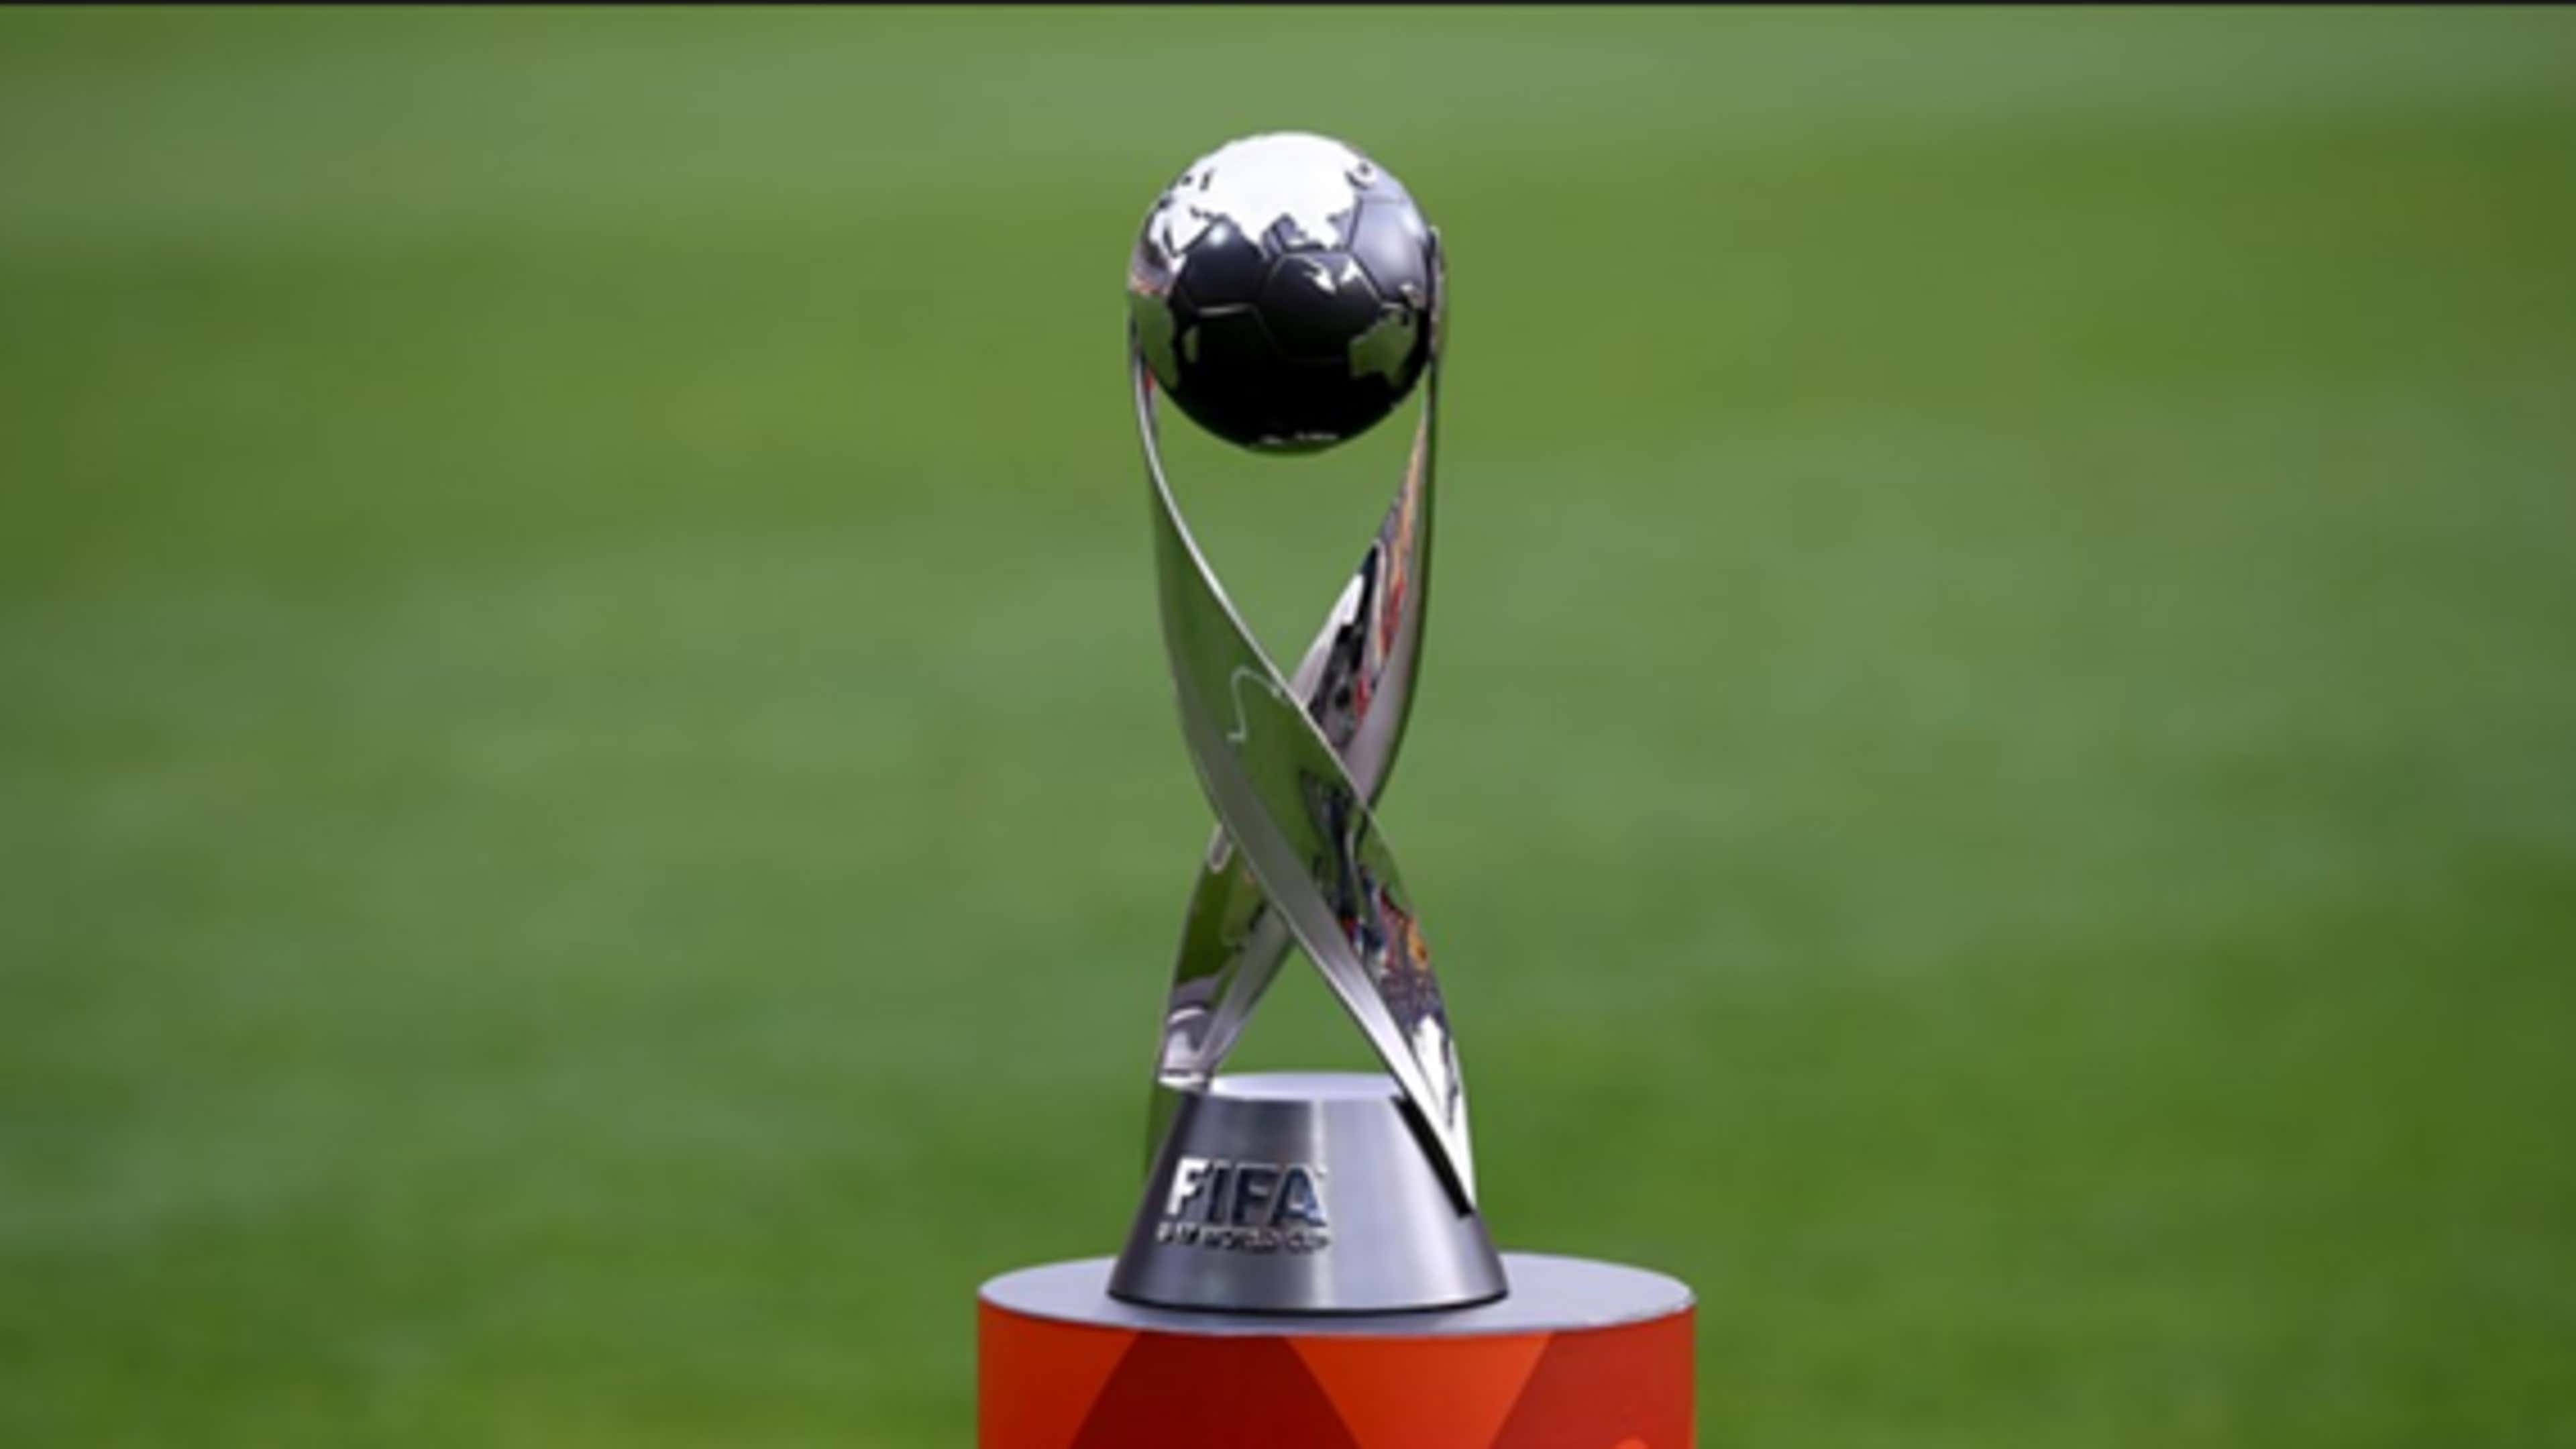 How to watch FIFA U17 World Cup: Live stream, TV channels